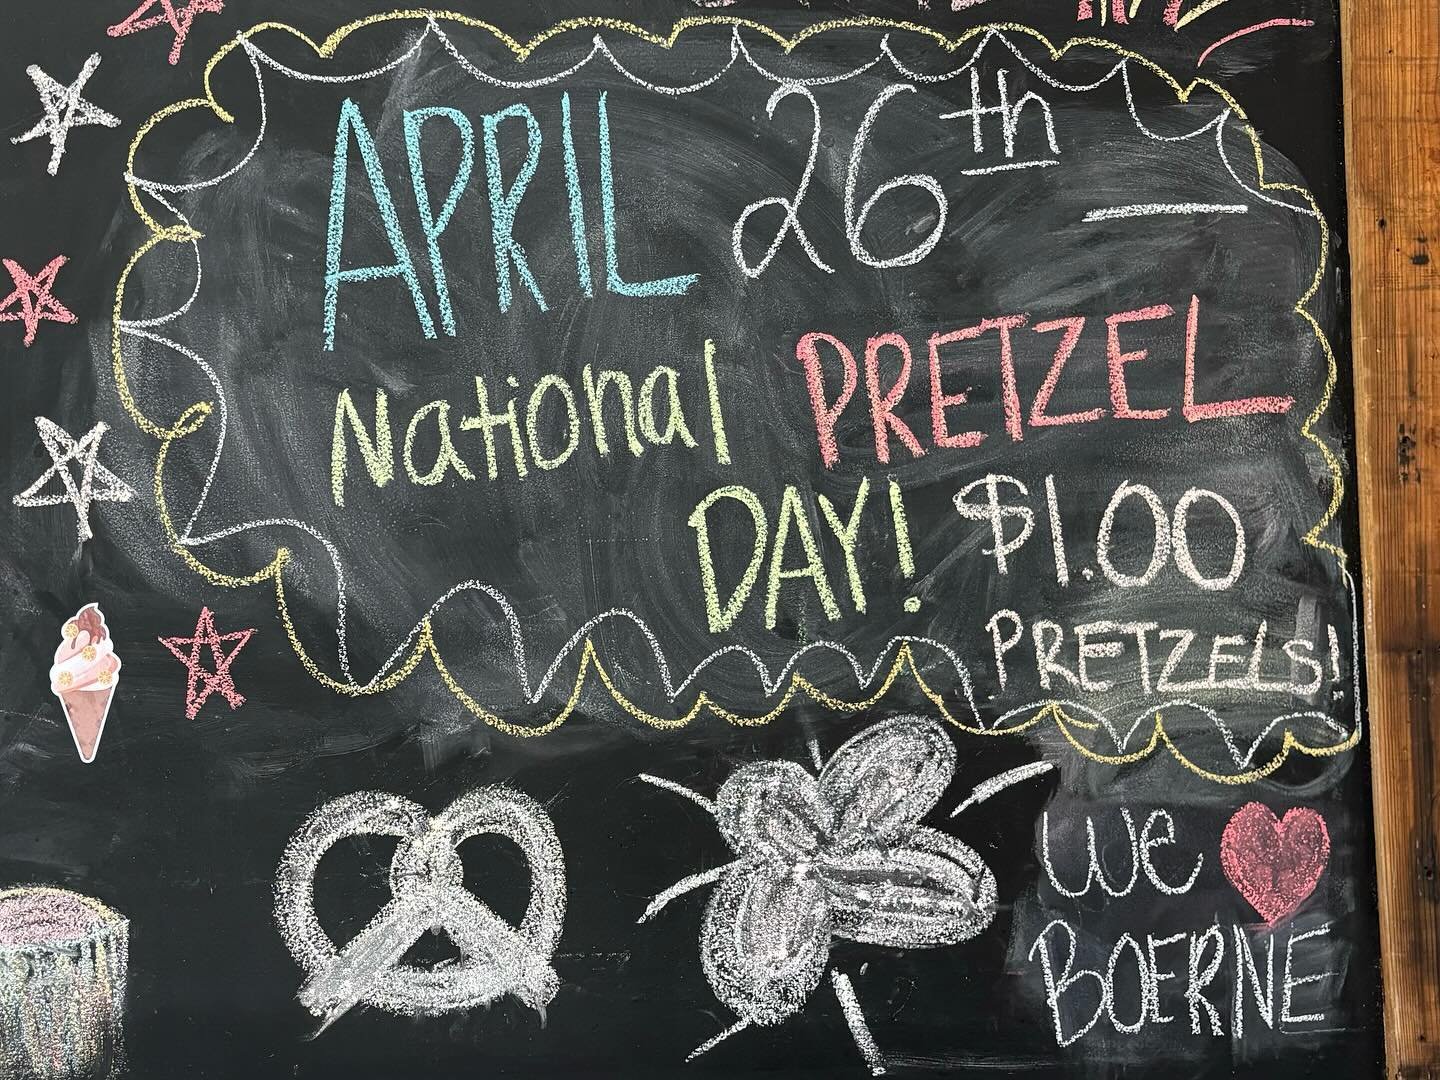 Authentic Philly Pretzels are $1.00 on National Pretzel Day, this Friday, April 26th! Stop by and get yourself a fresh and salty pretzel! 🥨🥨 

#saltyandsweet #pretzel #nationalpretzelday #yum